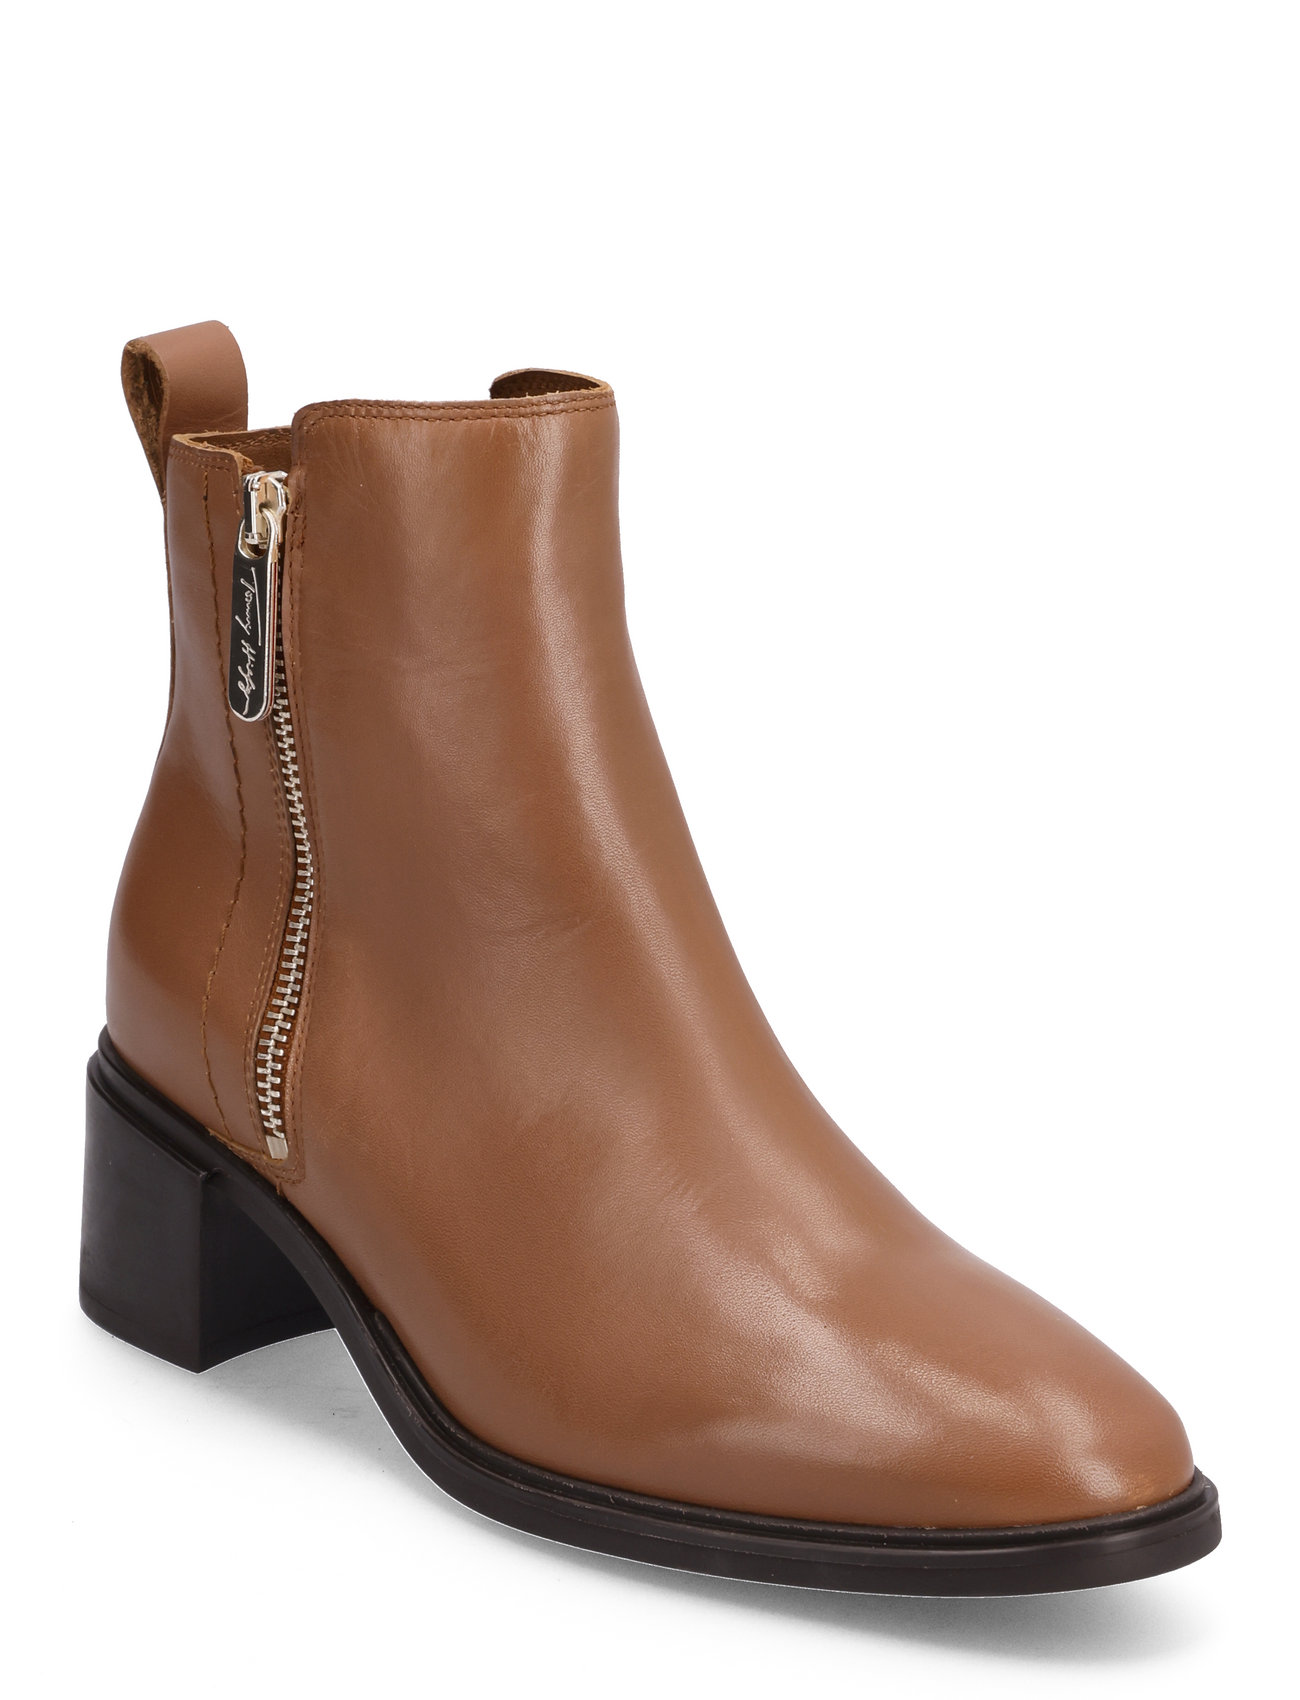 Zip Leather Mid Heel Boot Shoes Boots Ankle Boots Ankle Boots With Heel Brown Tommy Hilfiger